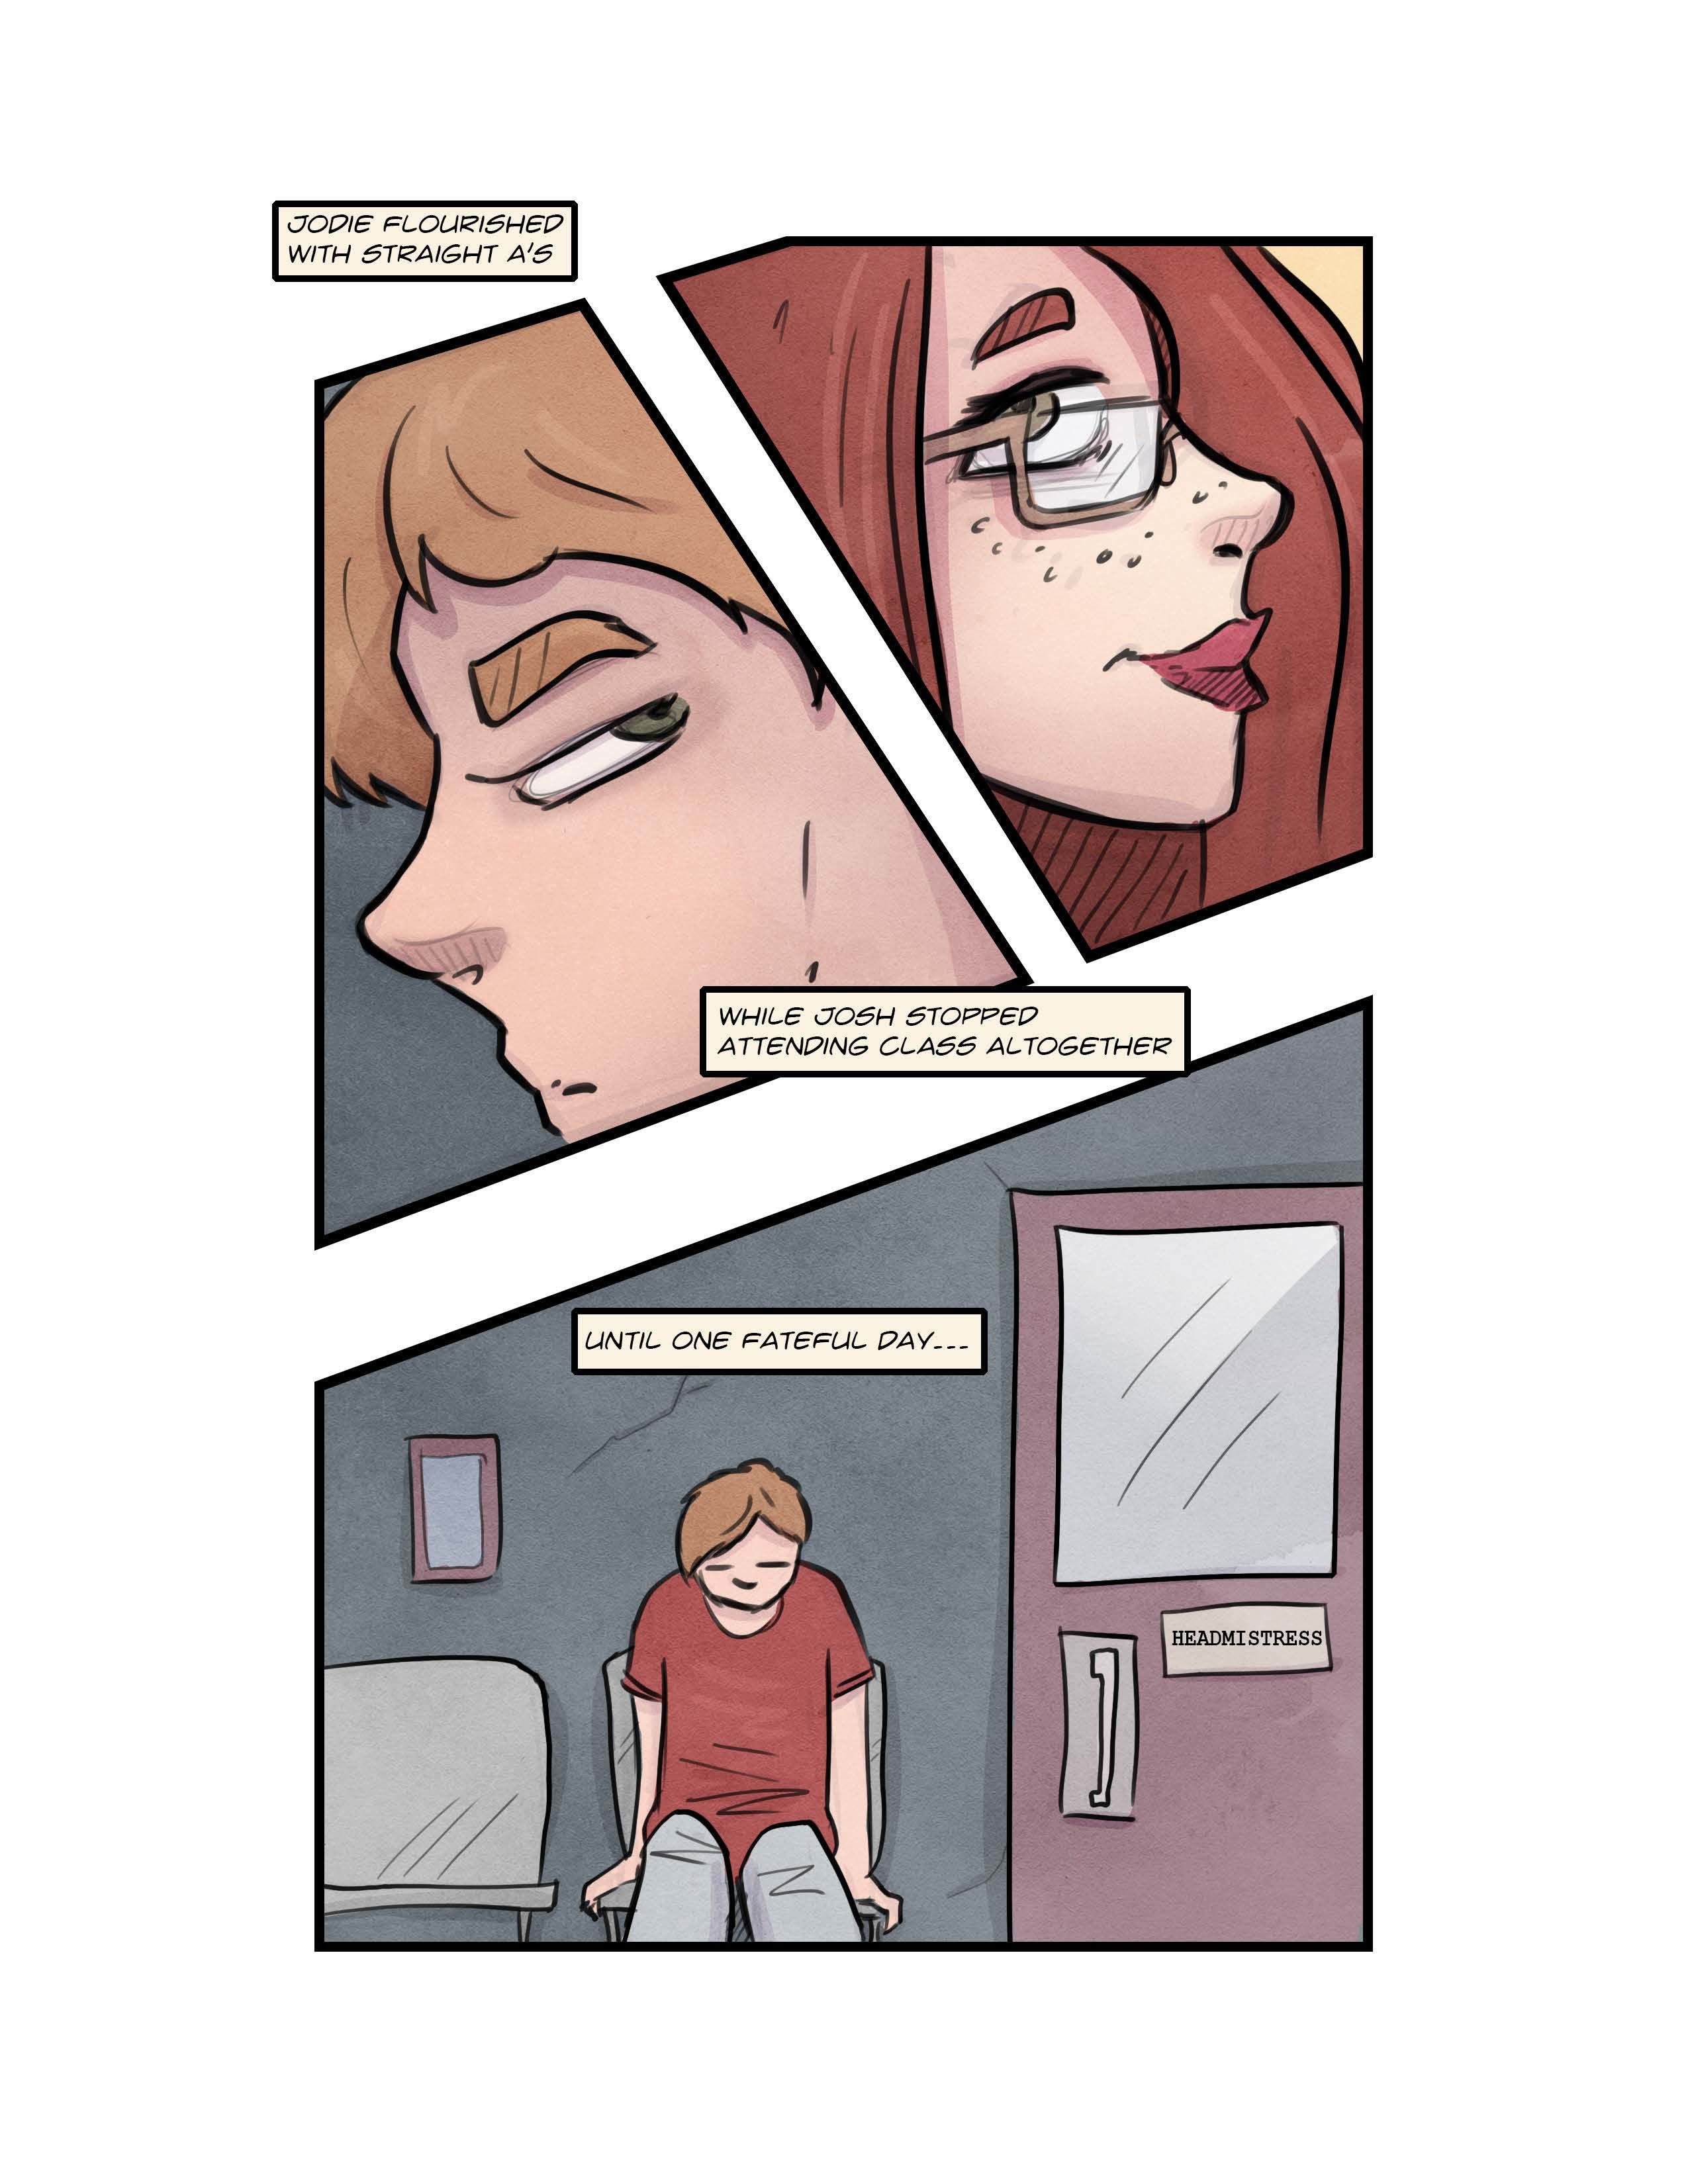 The New Girl Issue 1-5 by Grumpy TG page 11.